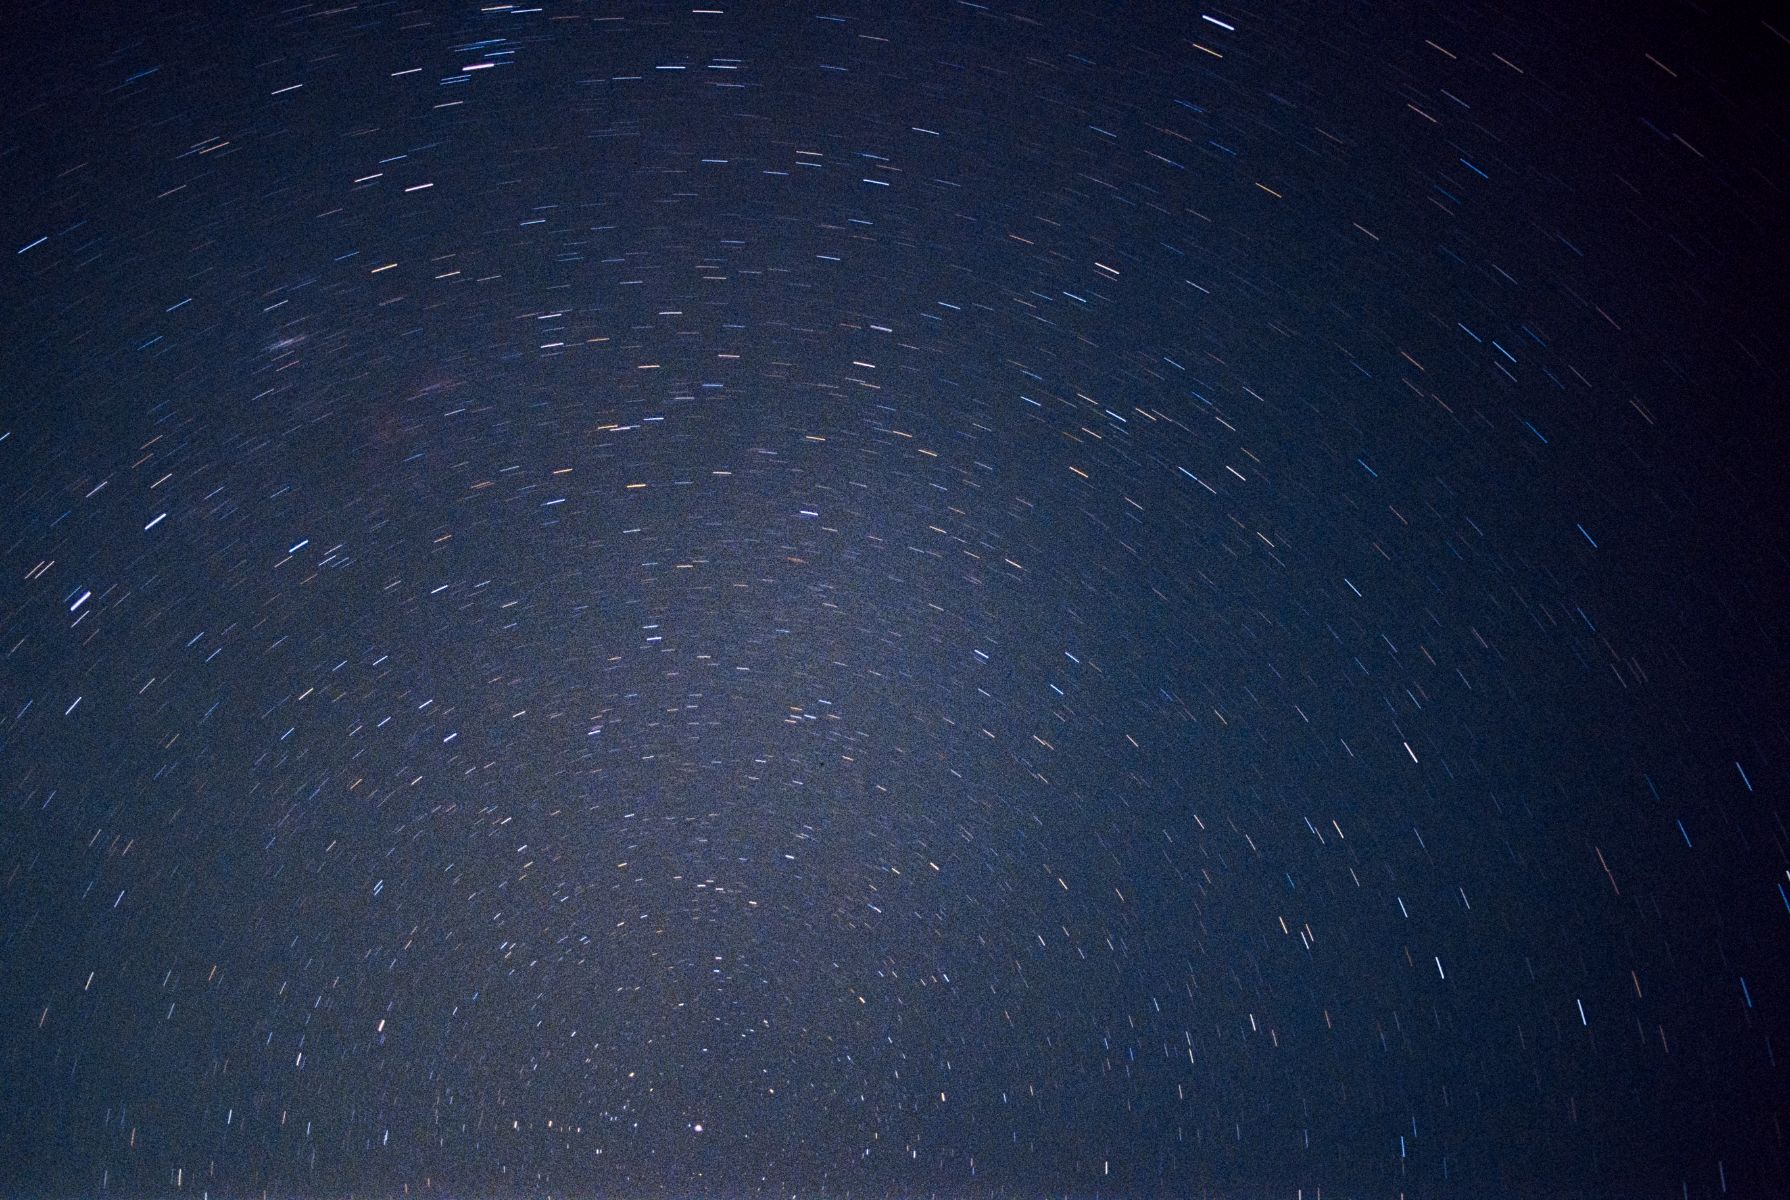 A visual of a photograph taken with a film camera that shows star trails instead of sharp points of light